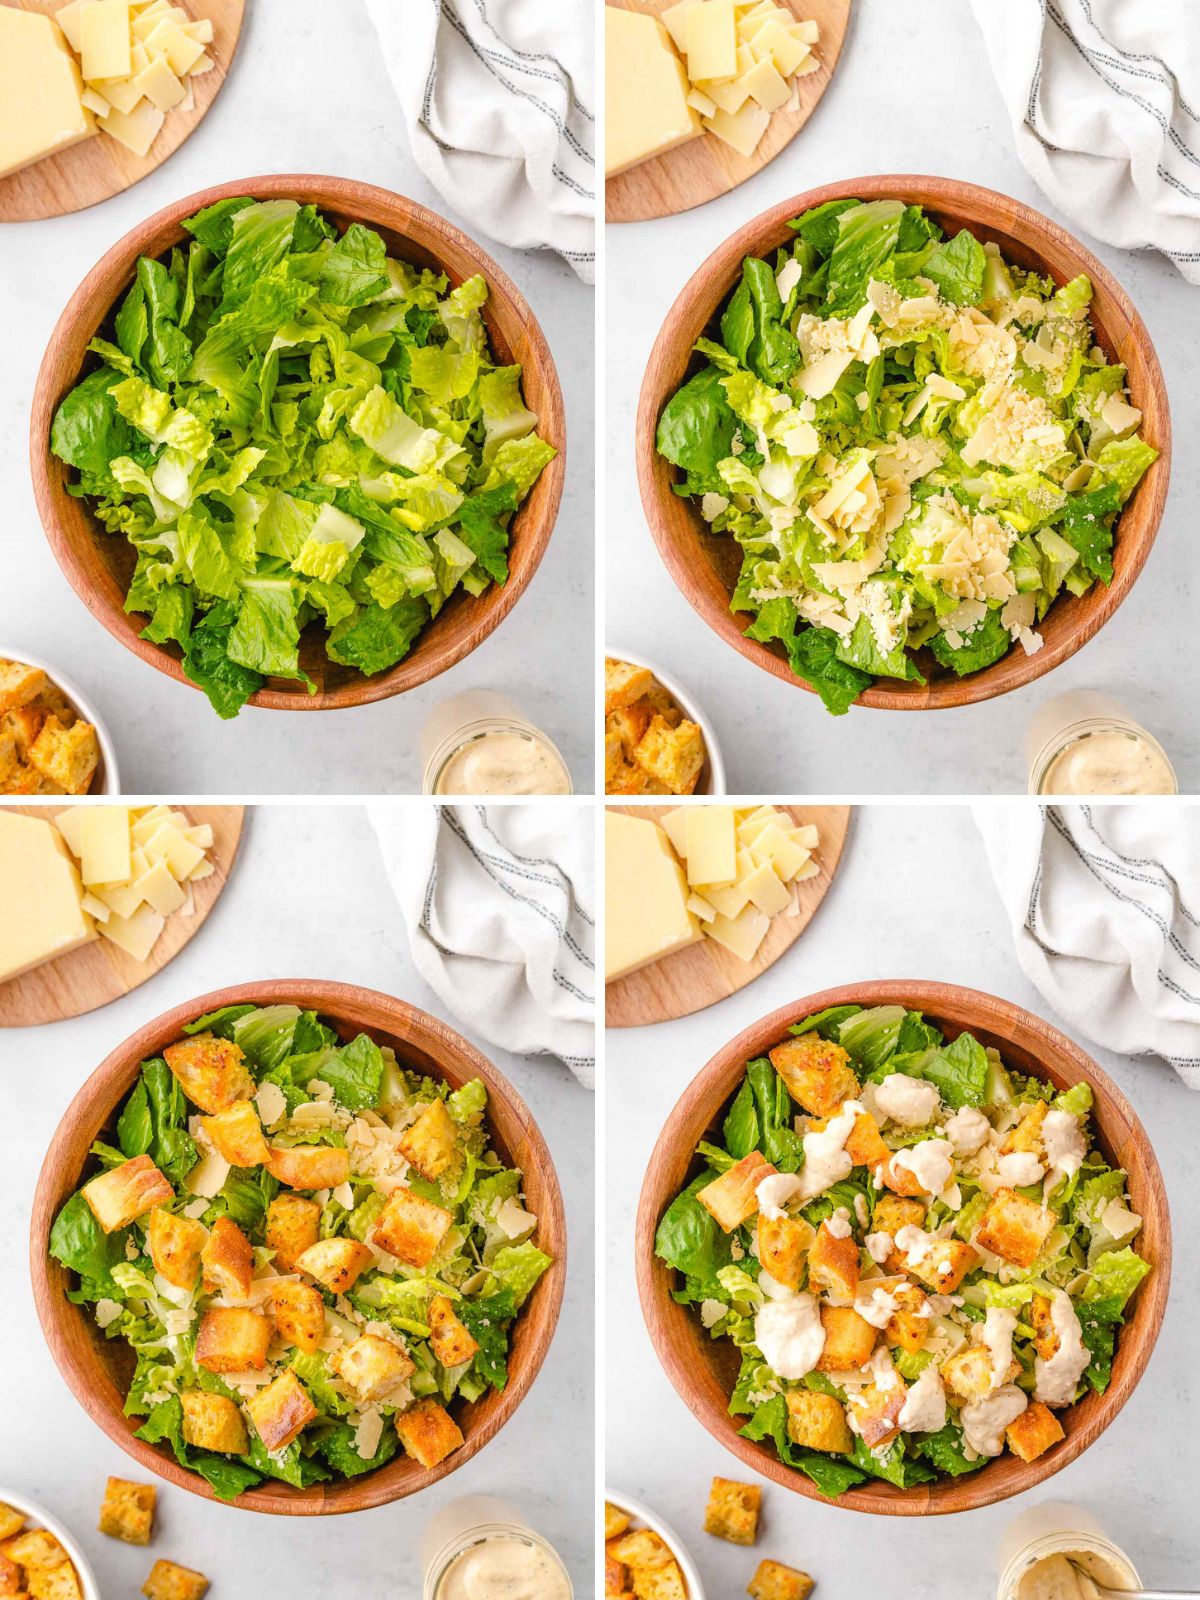 A collage image of romaine hearts added to a bowl, then adding in parmesan cheese, croutons, and caesar dressing.